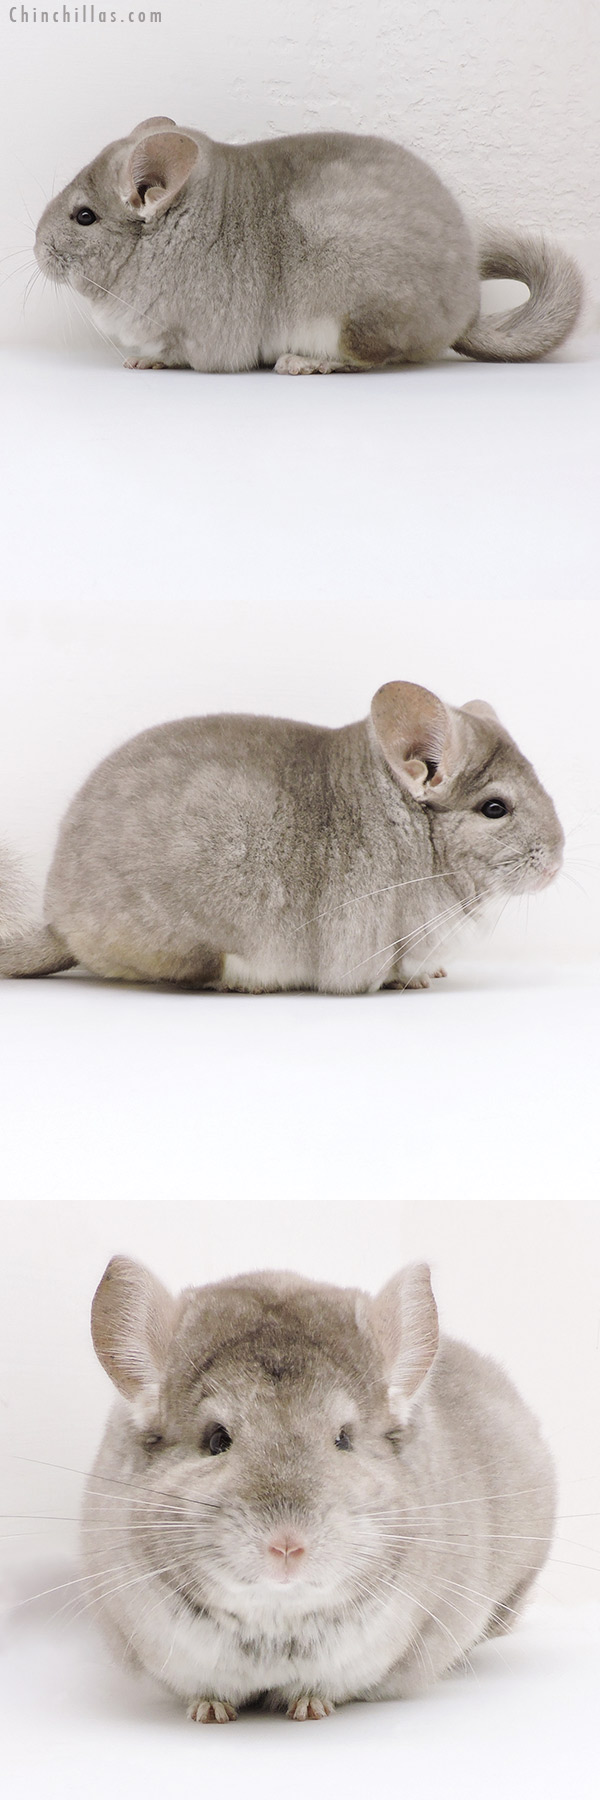 Chinchilla or related item offered for sale or export on Chinchillas.com - 18248 Large Blocky Premium Production Quality Beige Female Chinchilla